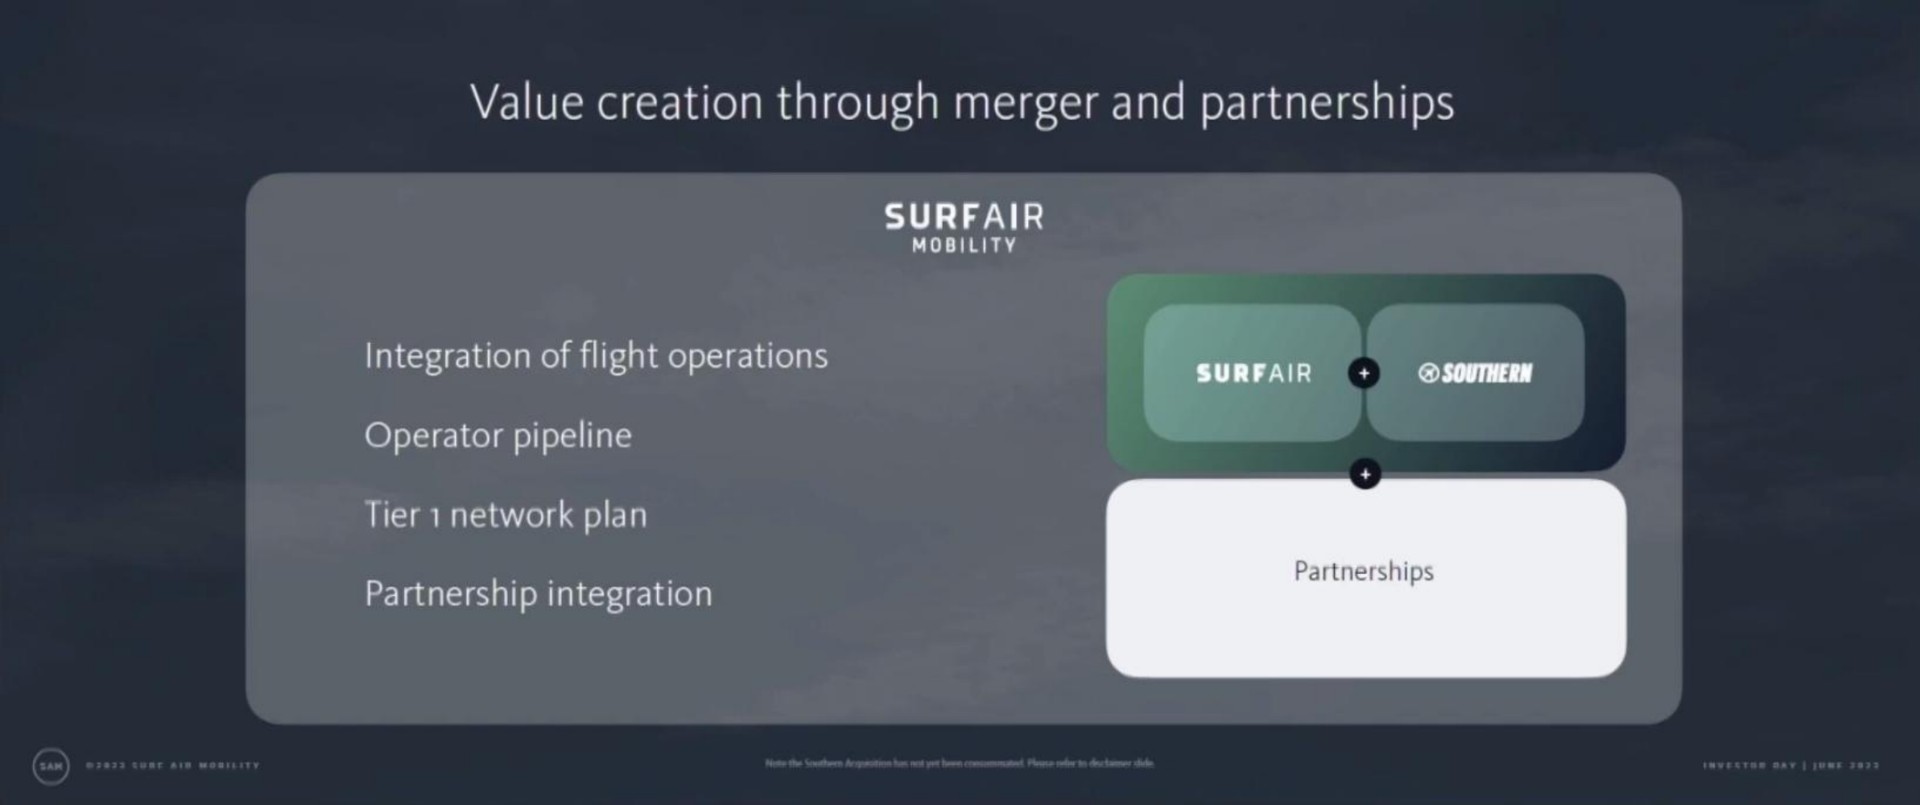 value creation through merger and partnerships ala integration of flight operations an operator pipeline partnership integration partnerships | Surf Air